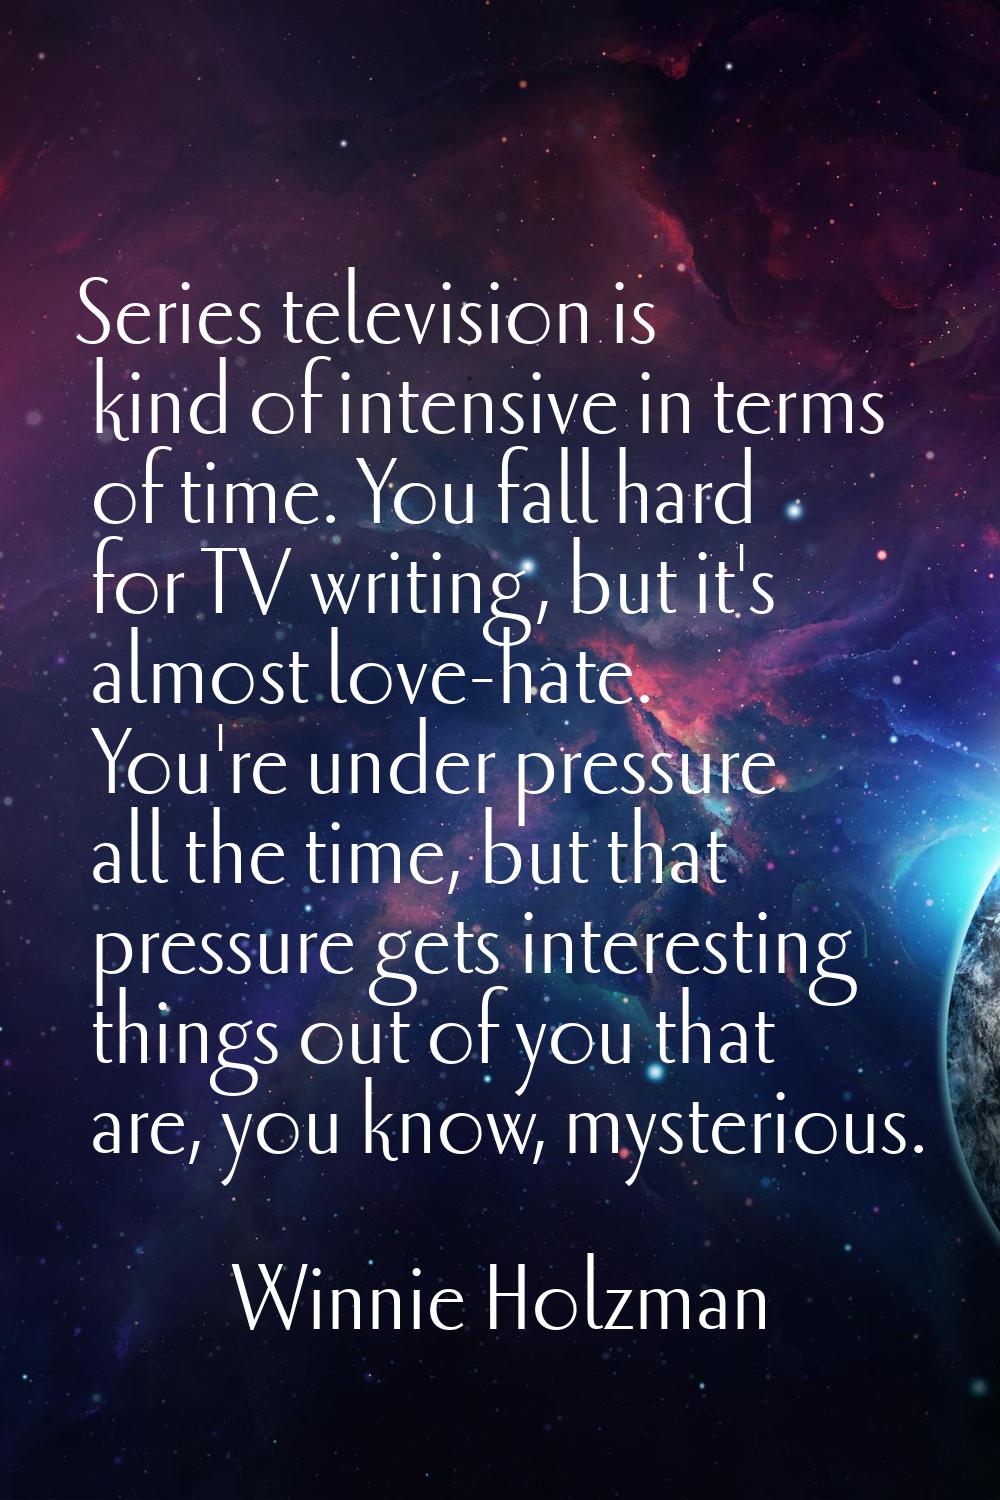 Series television is kind of intensive in terms of time. You fall hard for TV writing, but it's alm